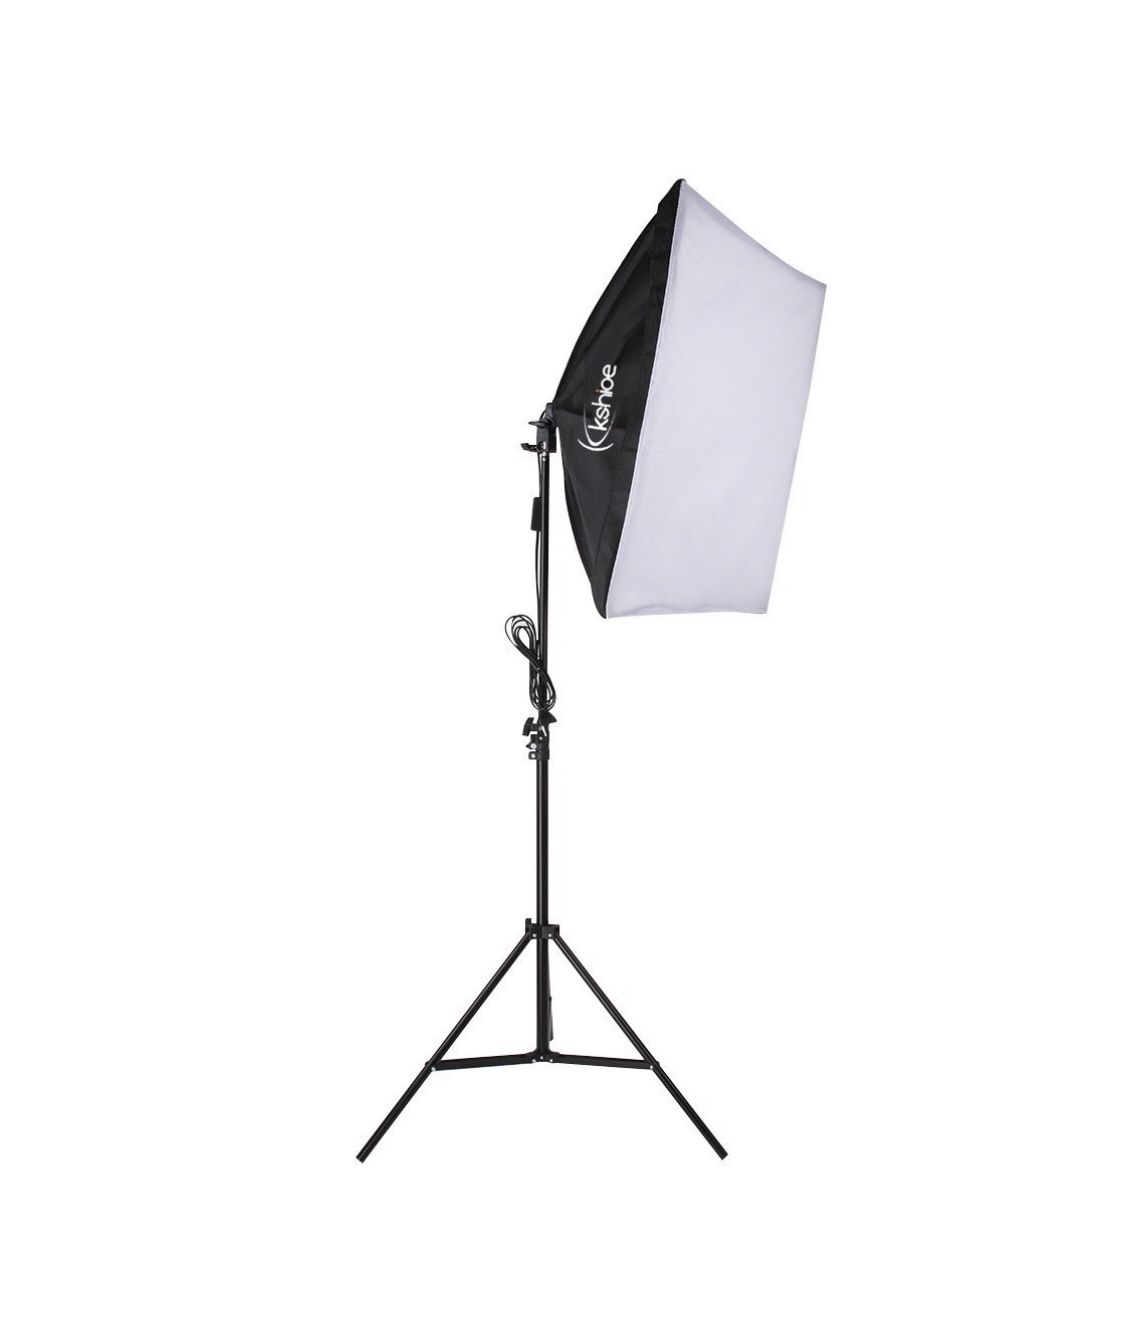 3 Zimtown Photo Studio Softbox Photography Light Stand Continuous Lighting Kit 1000W